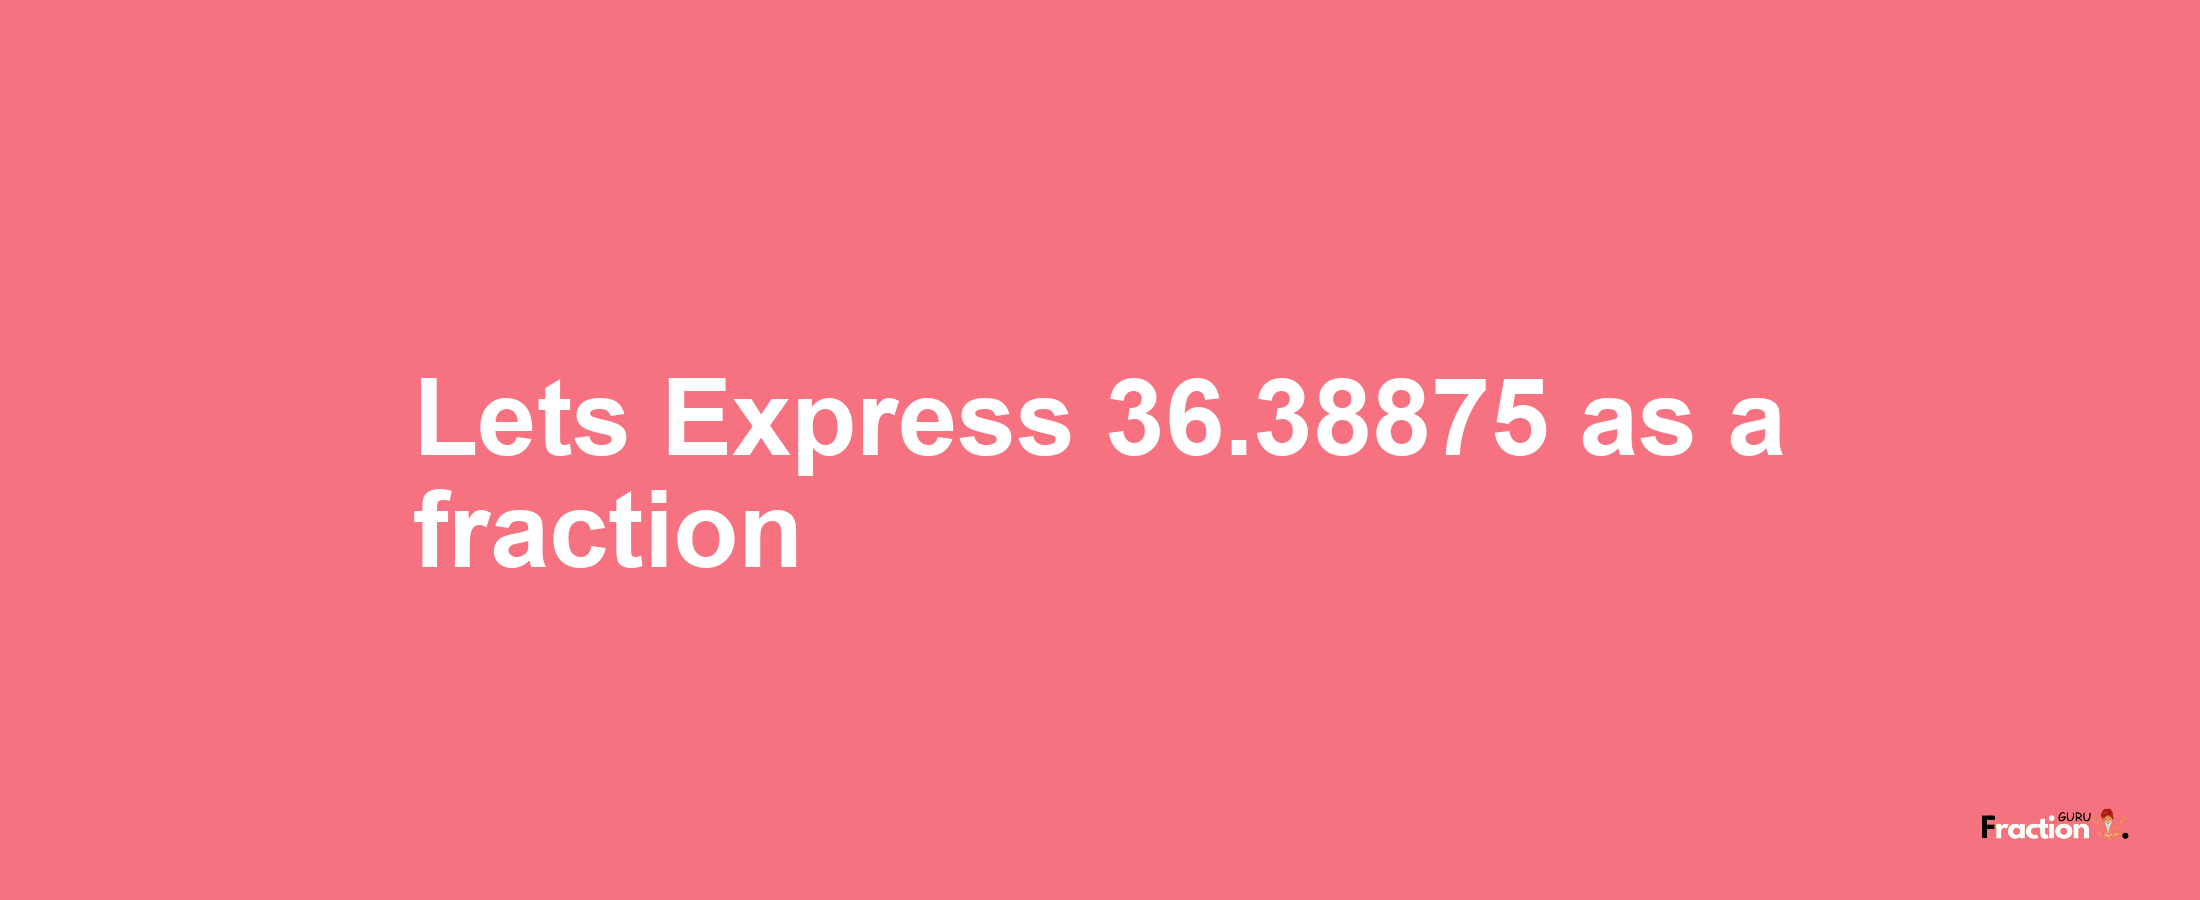 Lets Express 36.38875 as afraction